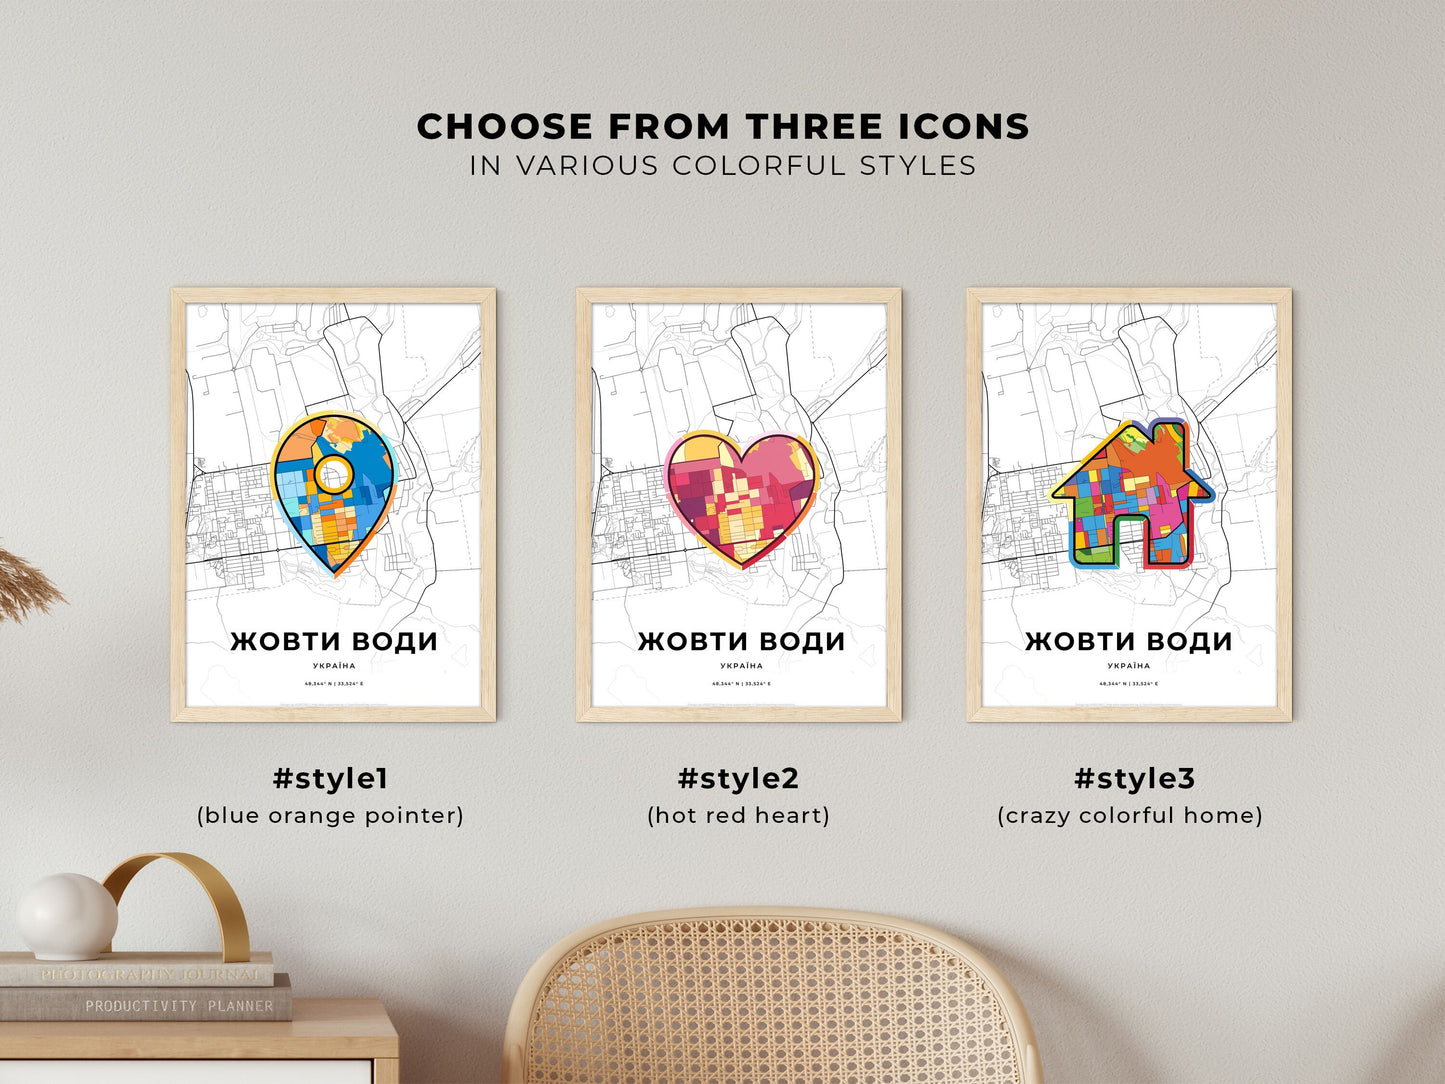 ZHOVTI VODY UKRAINE minimal art map with a colorful icon. Where it all began, Couple map gift.